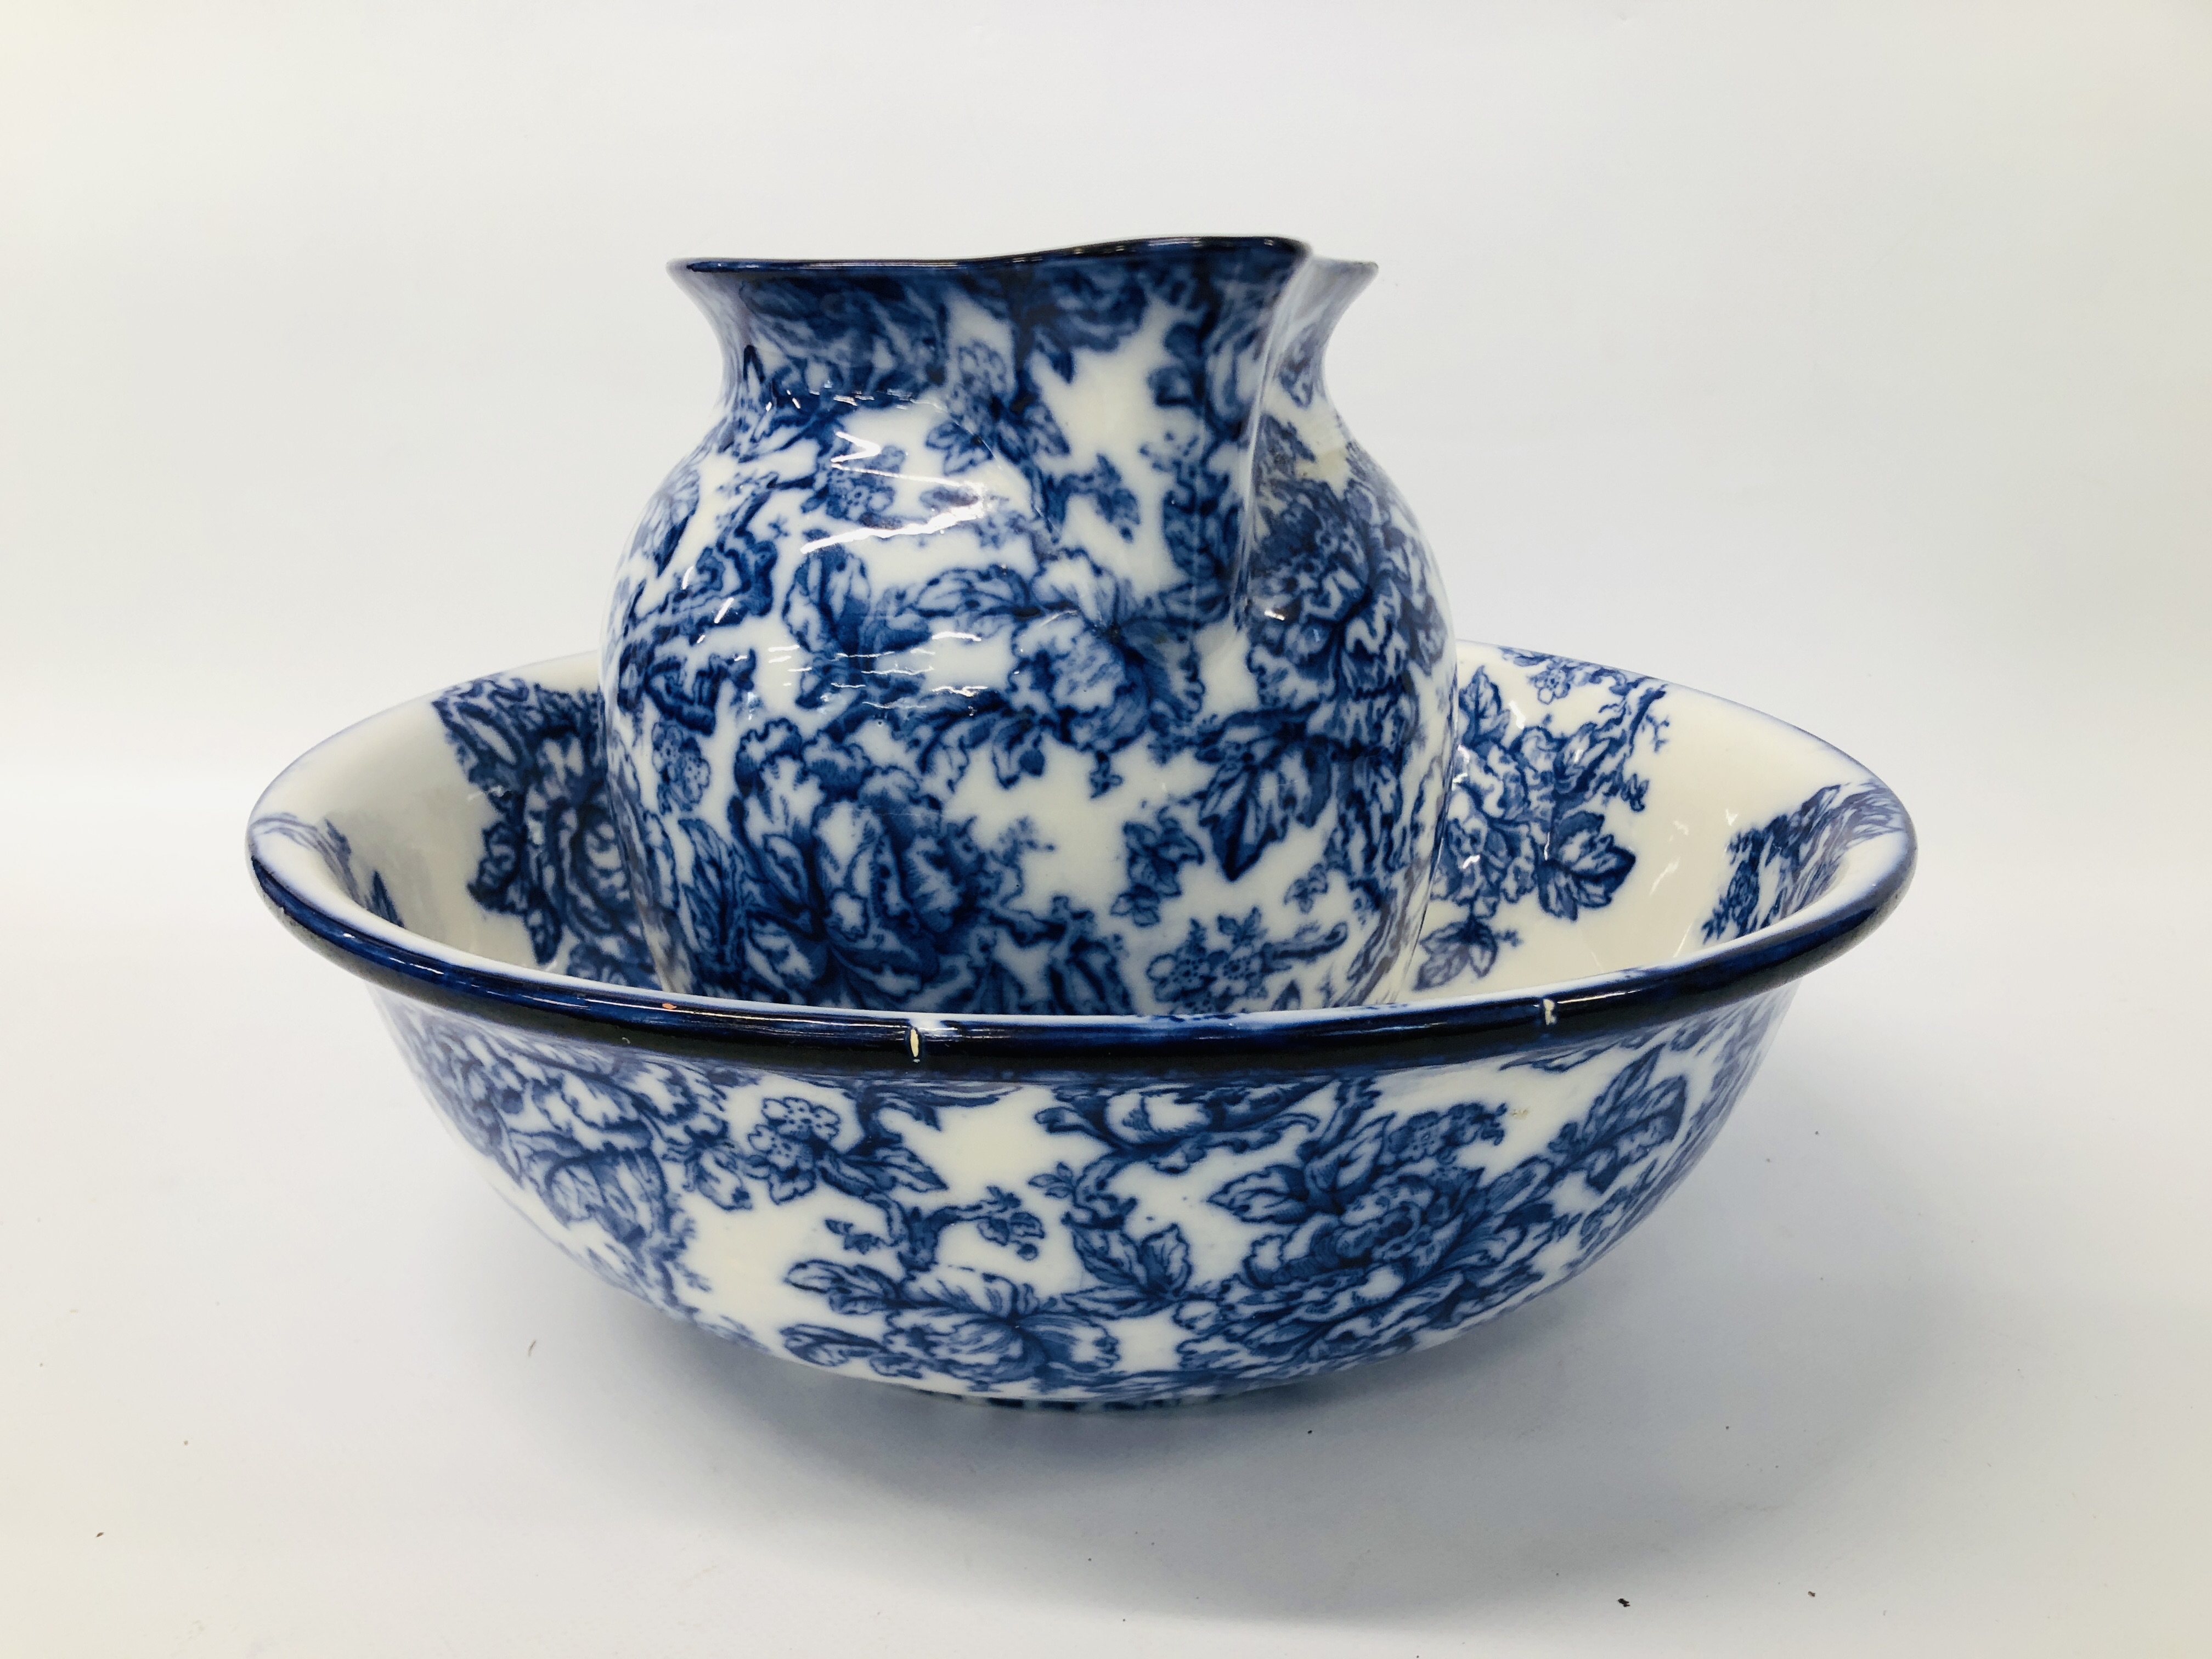 LOSOL WARE "CAVENDISH" BLUE AND WHITE ROSE DECORATED WASH JUG AND BOWL ALONG WITH A "BOOTHS" - Image 9 of 11